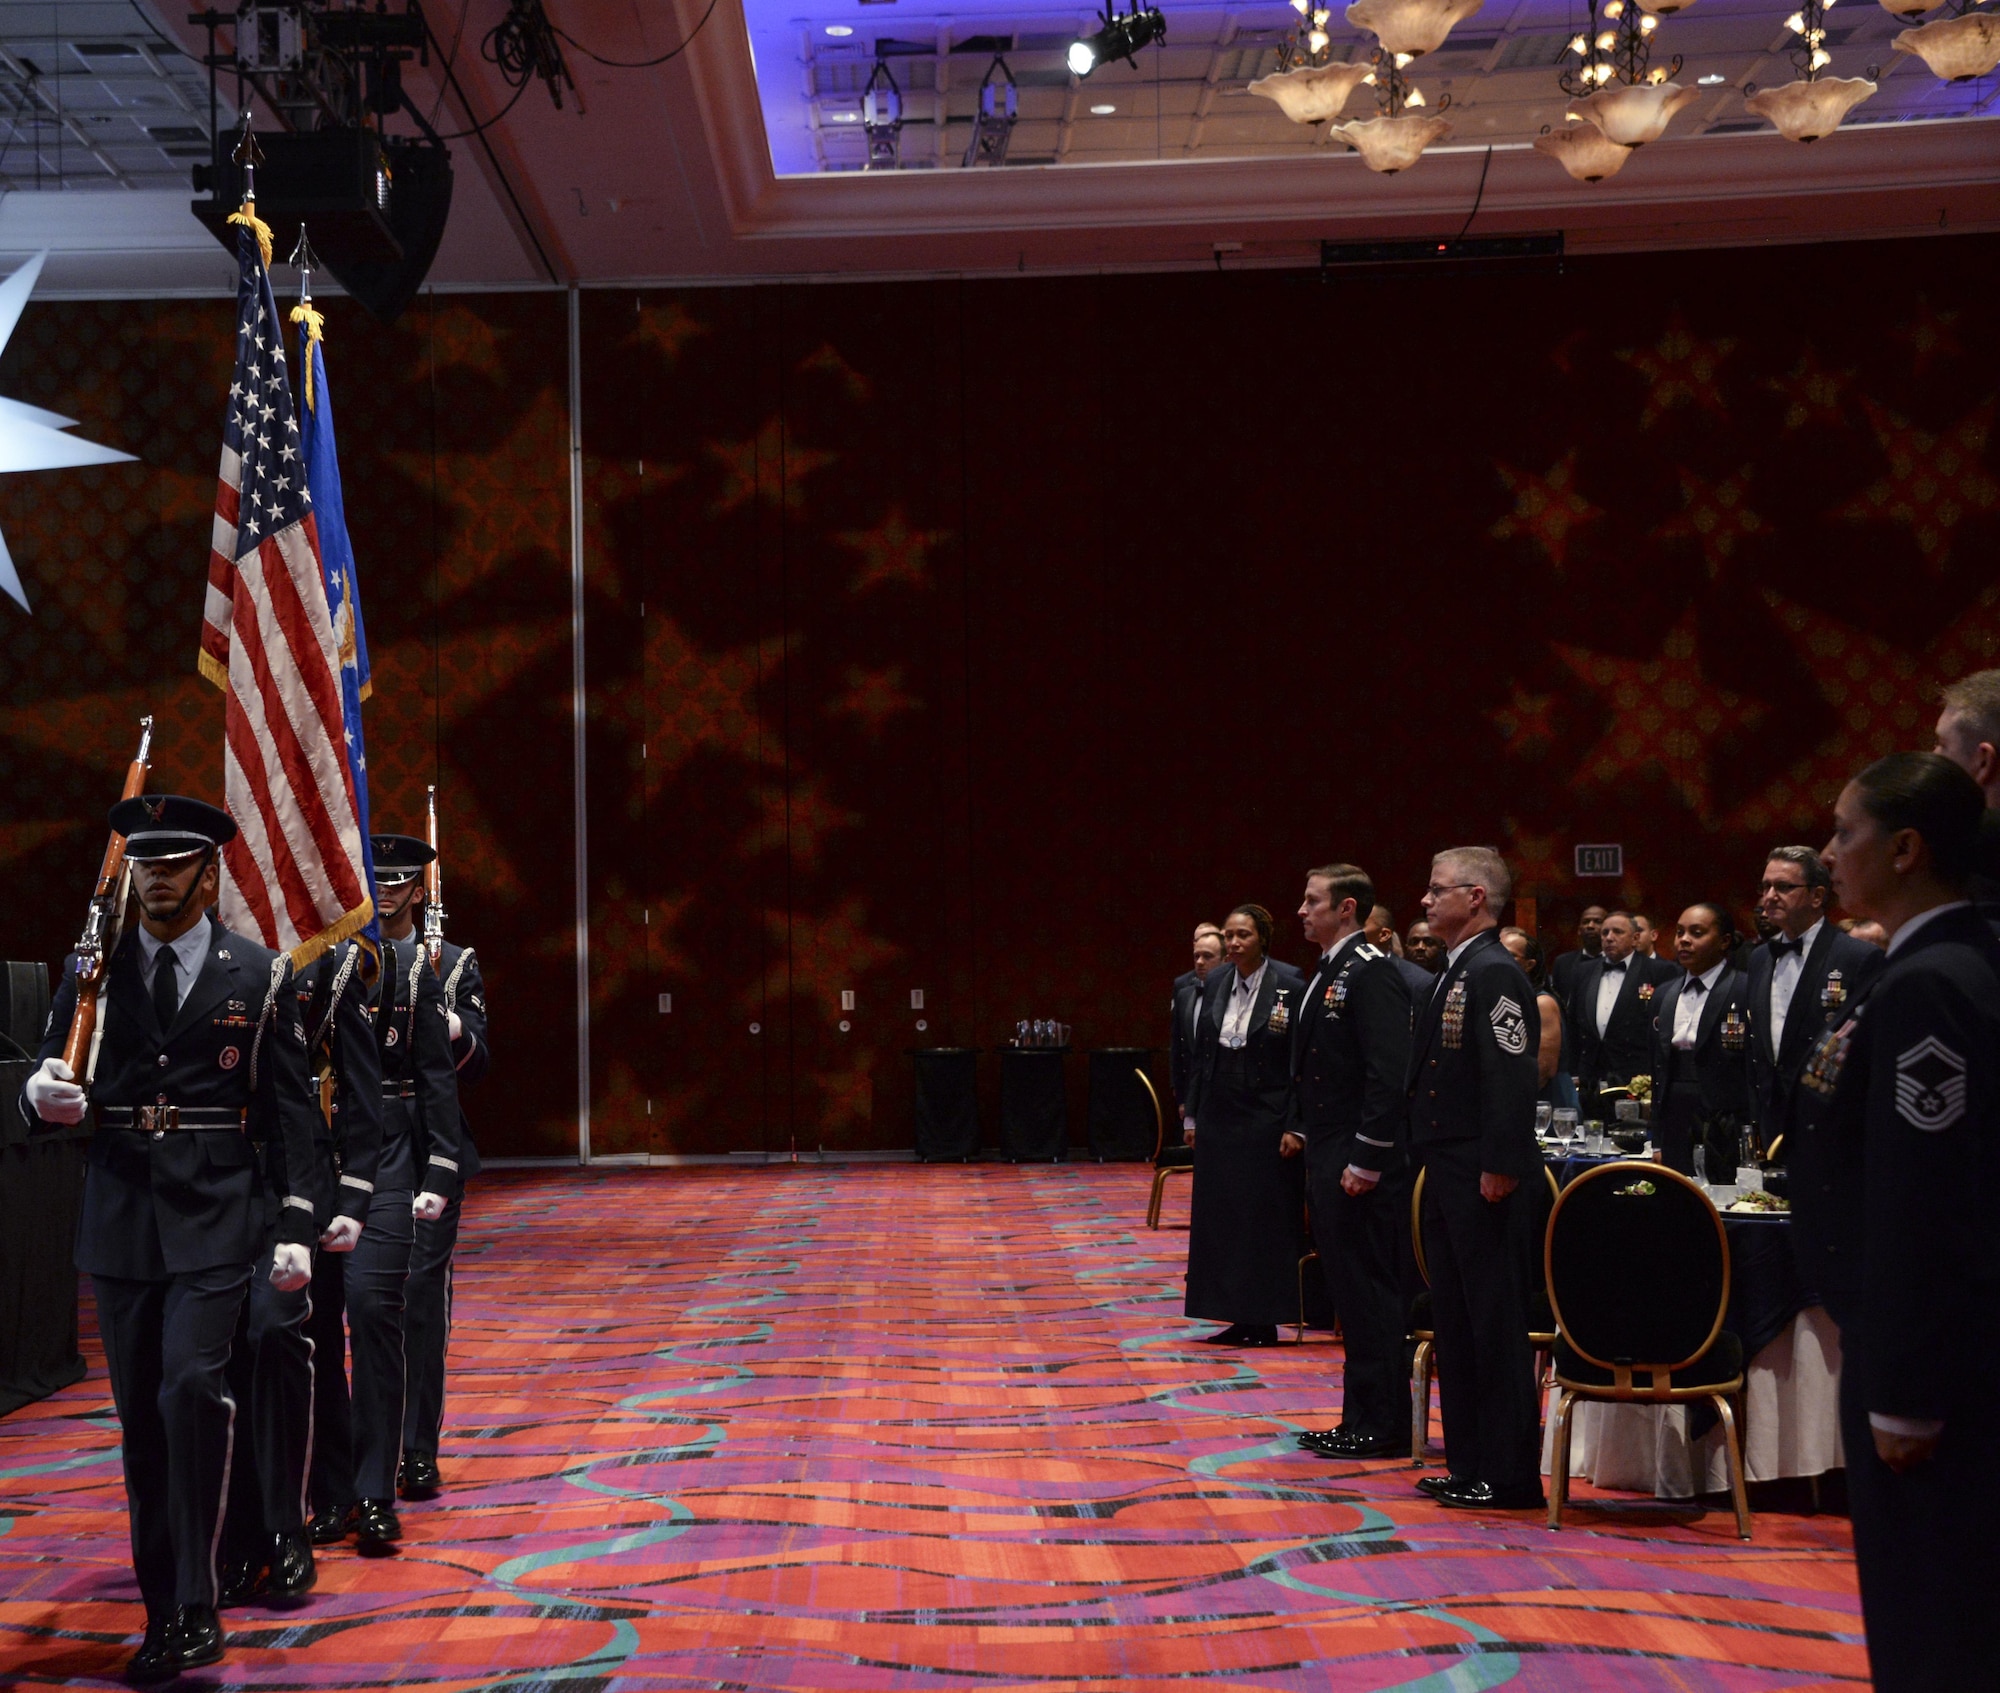 The Honor Guard from Travis Air Force Base, Calif., present the colors at the Air Force Sergeants Association International Convention in Reno, Nevada. This signified the beginning of the Air Force Honors Banquet, which was the final event for the Professional Airmen's Conference. (U.S. Air Force photo by Senior Airman Amber Carter)